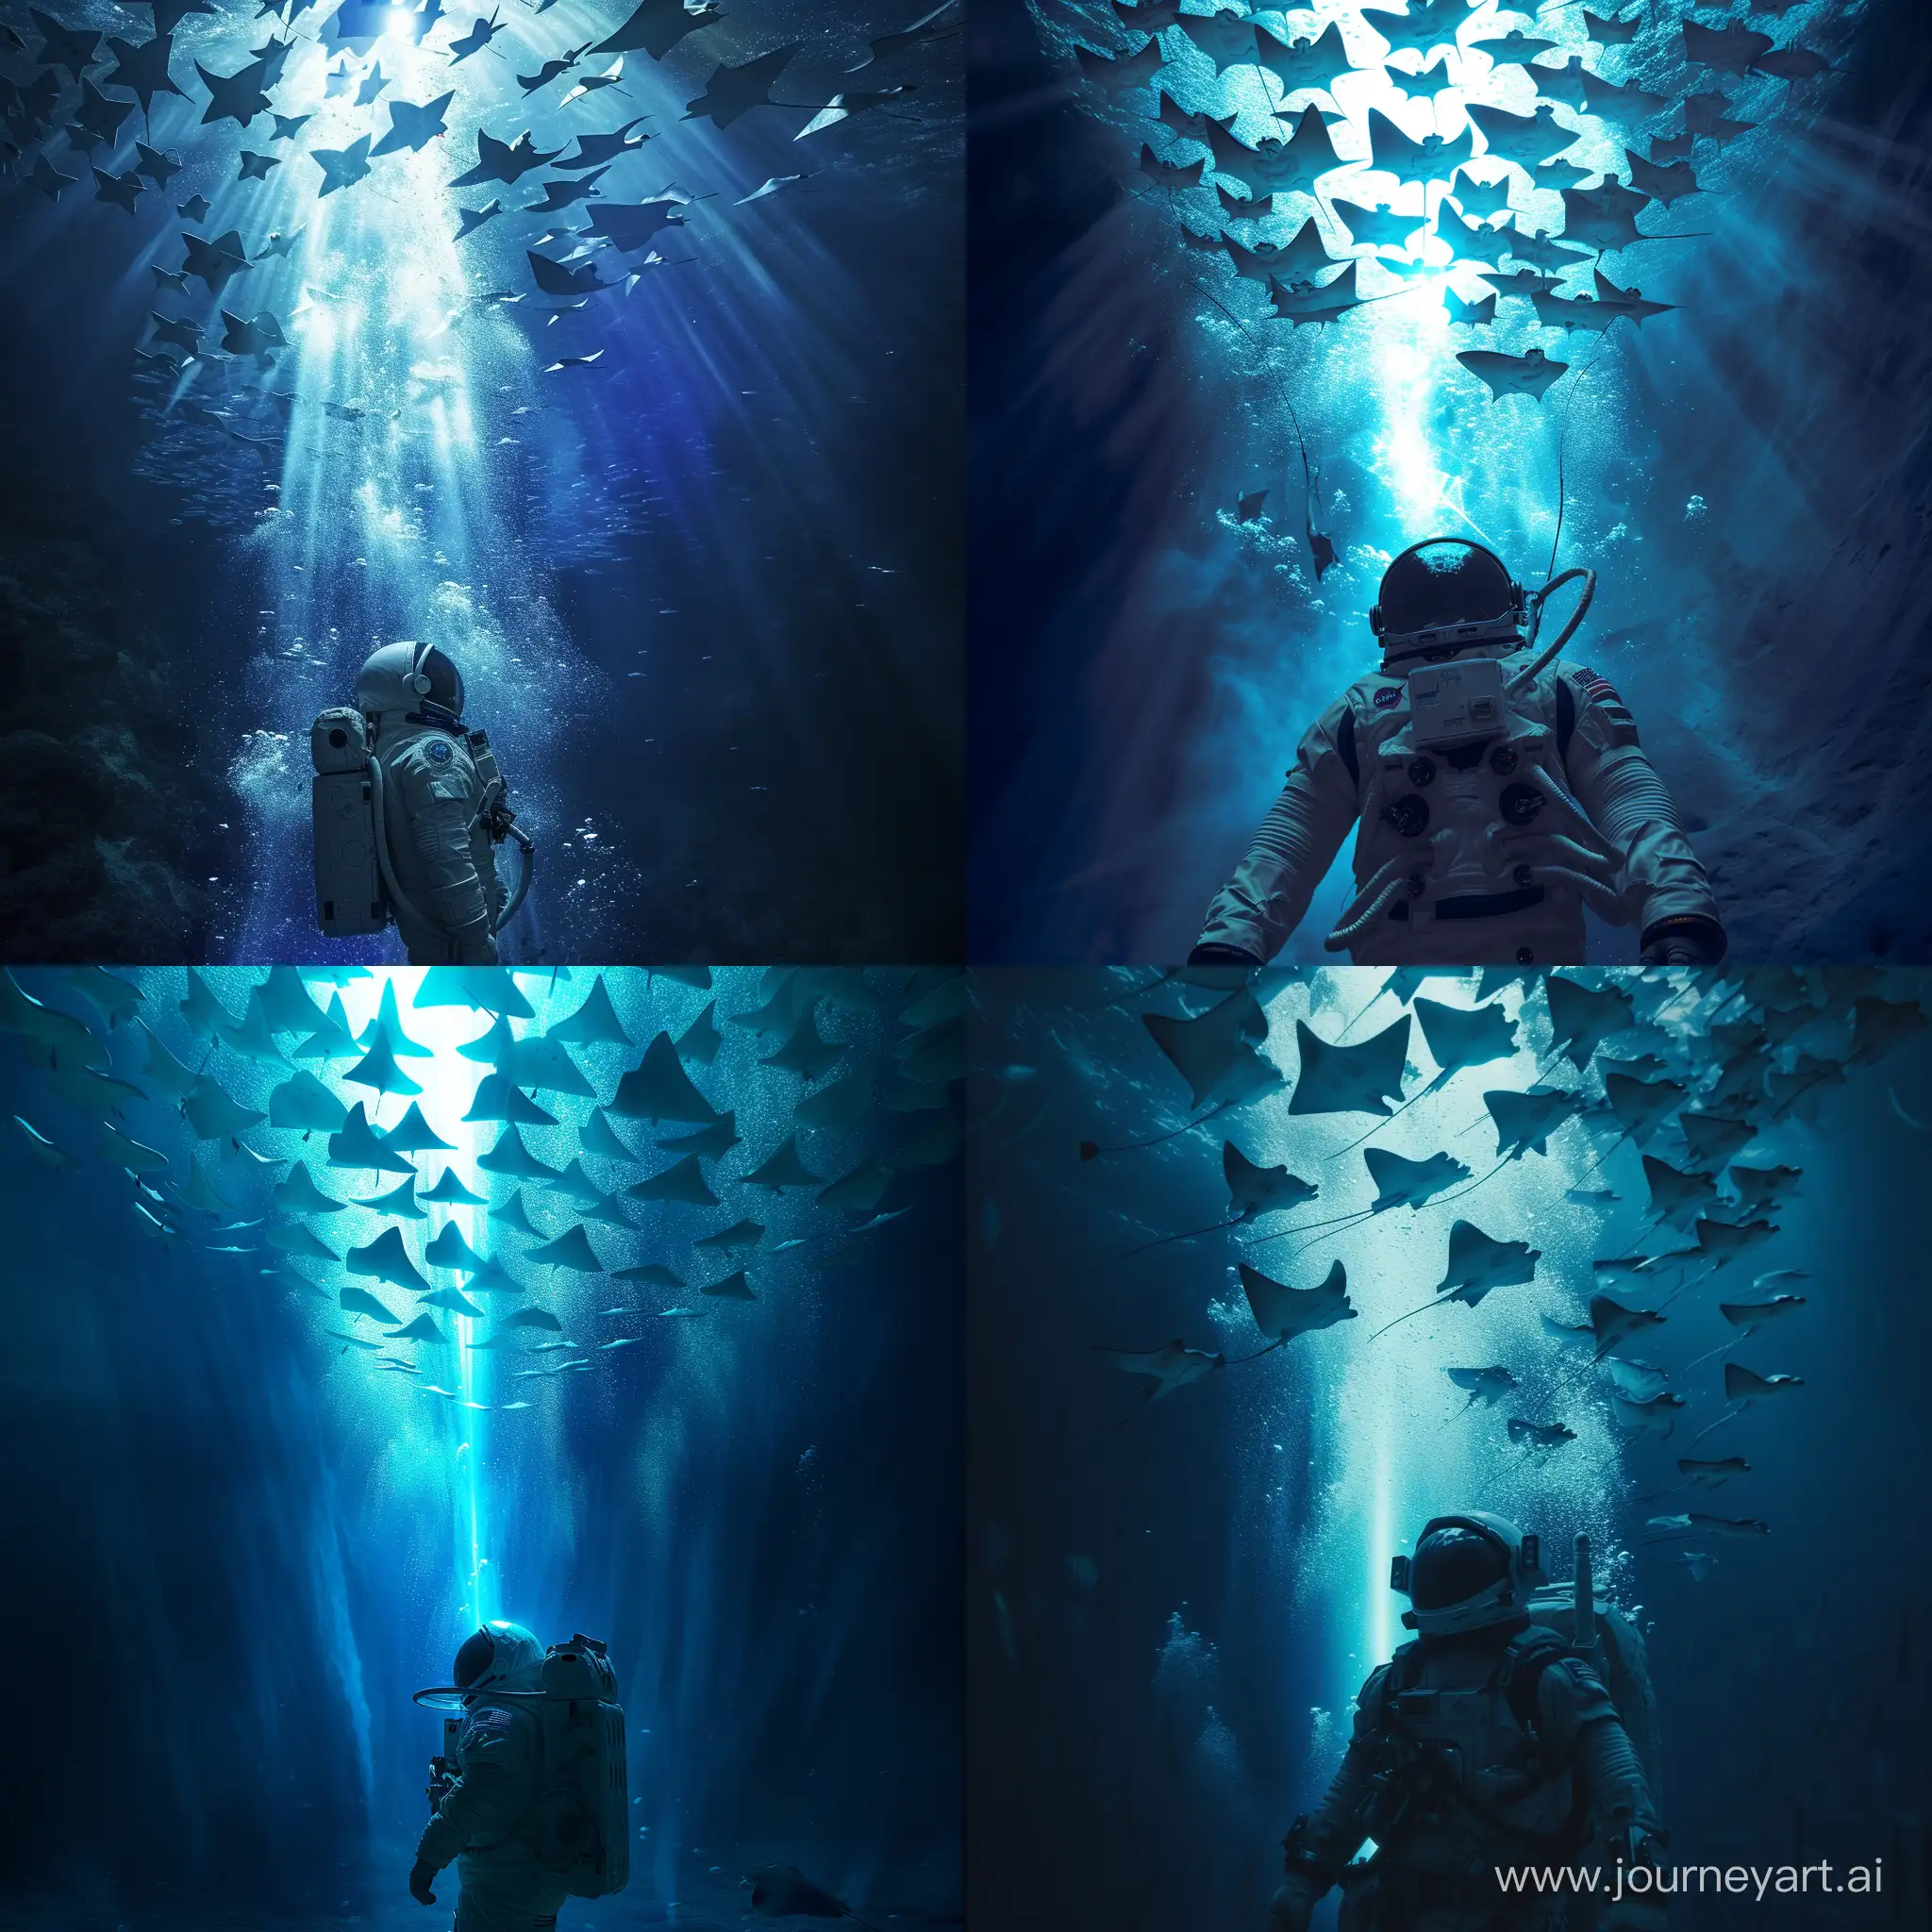 The astronaut is underwater. Bright blue-white light breaks through the surface of the water. Above the astronaut, a huge flock of stingrays floats in an unknown direction